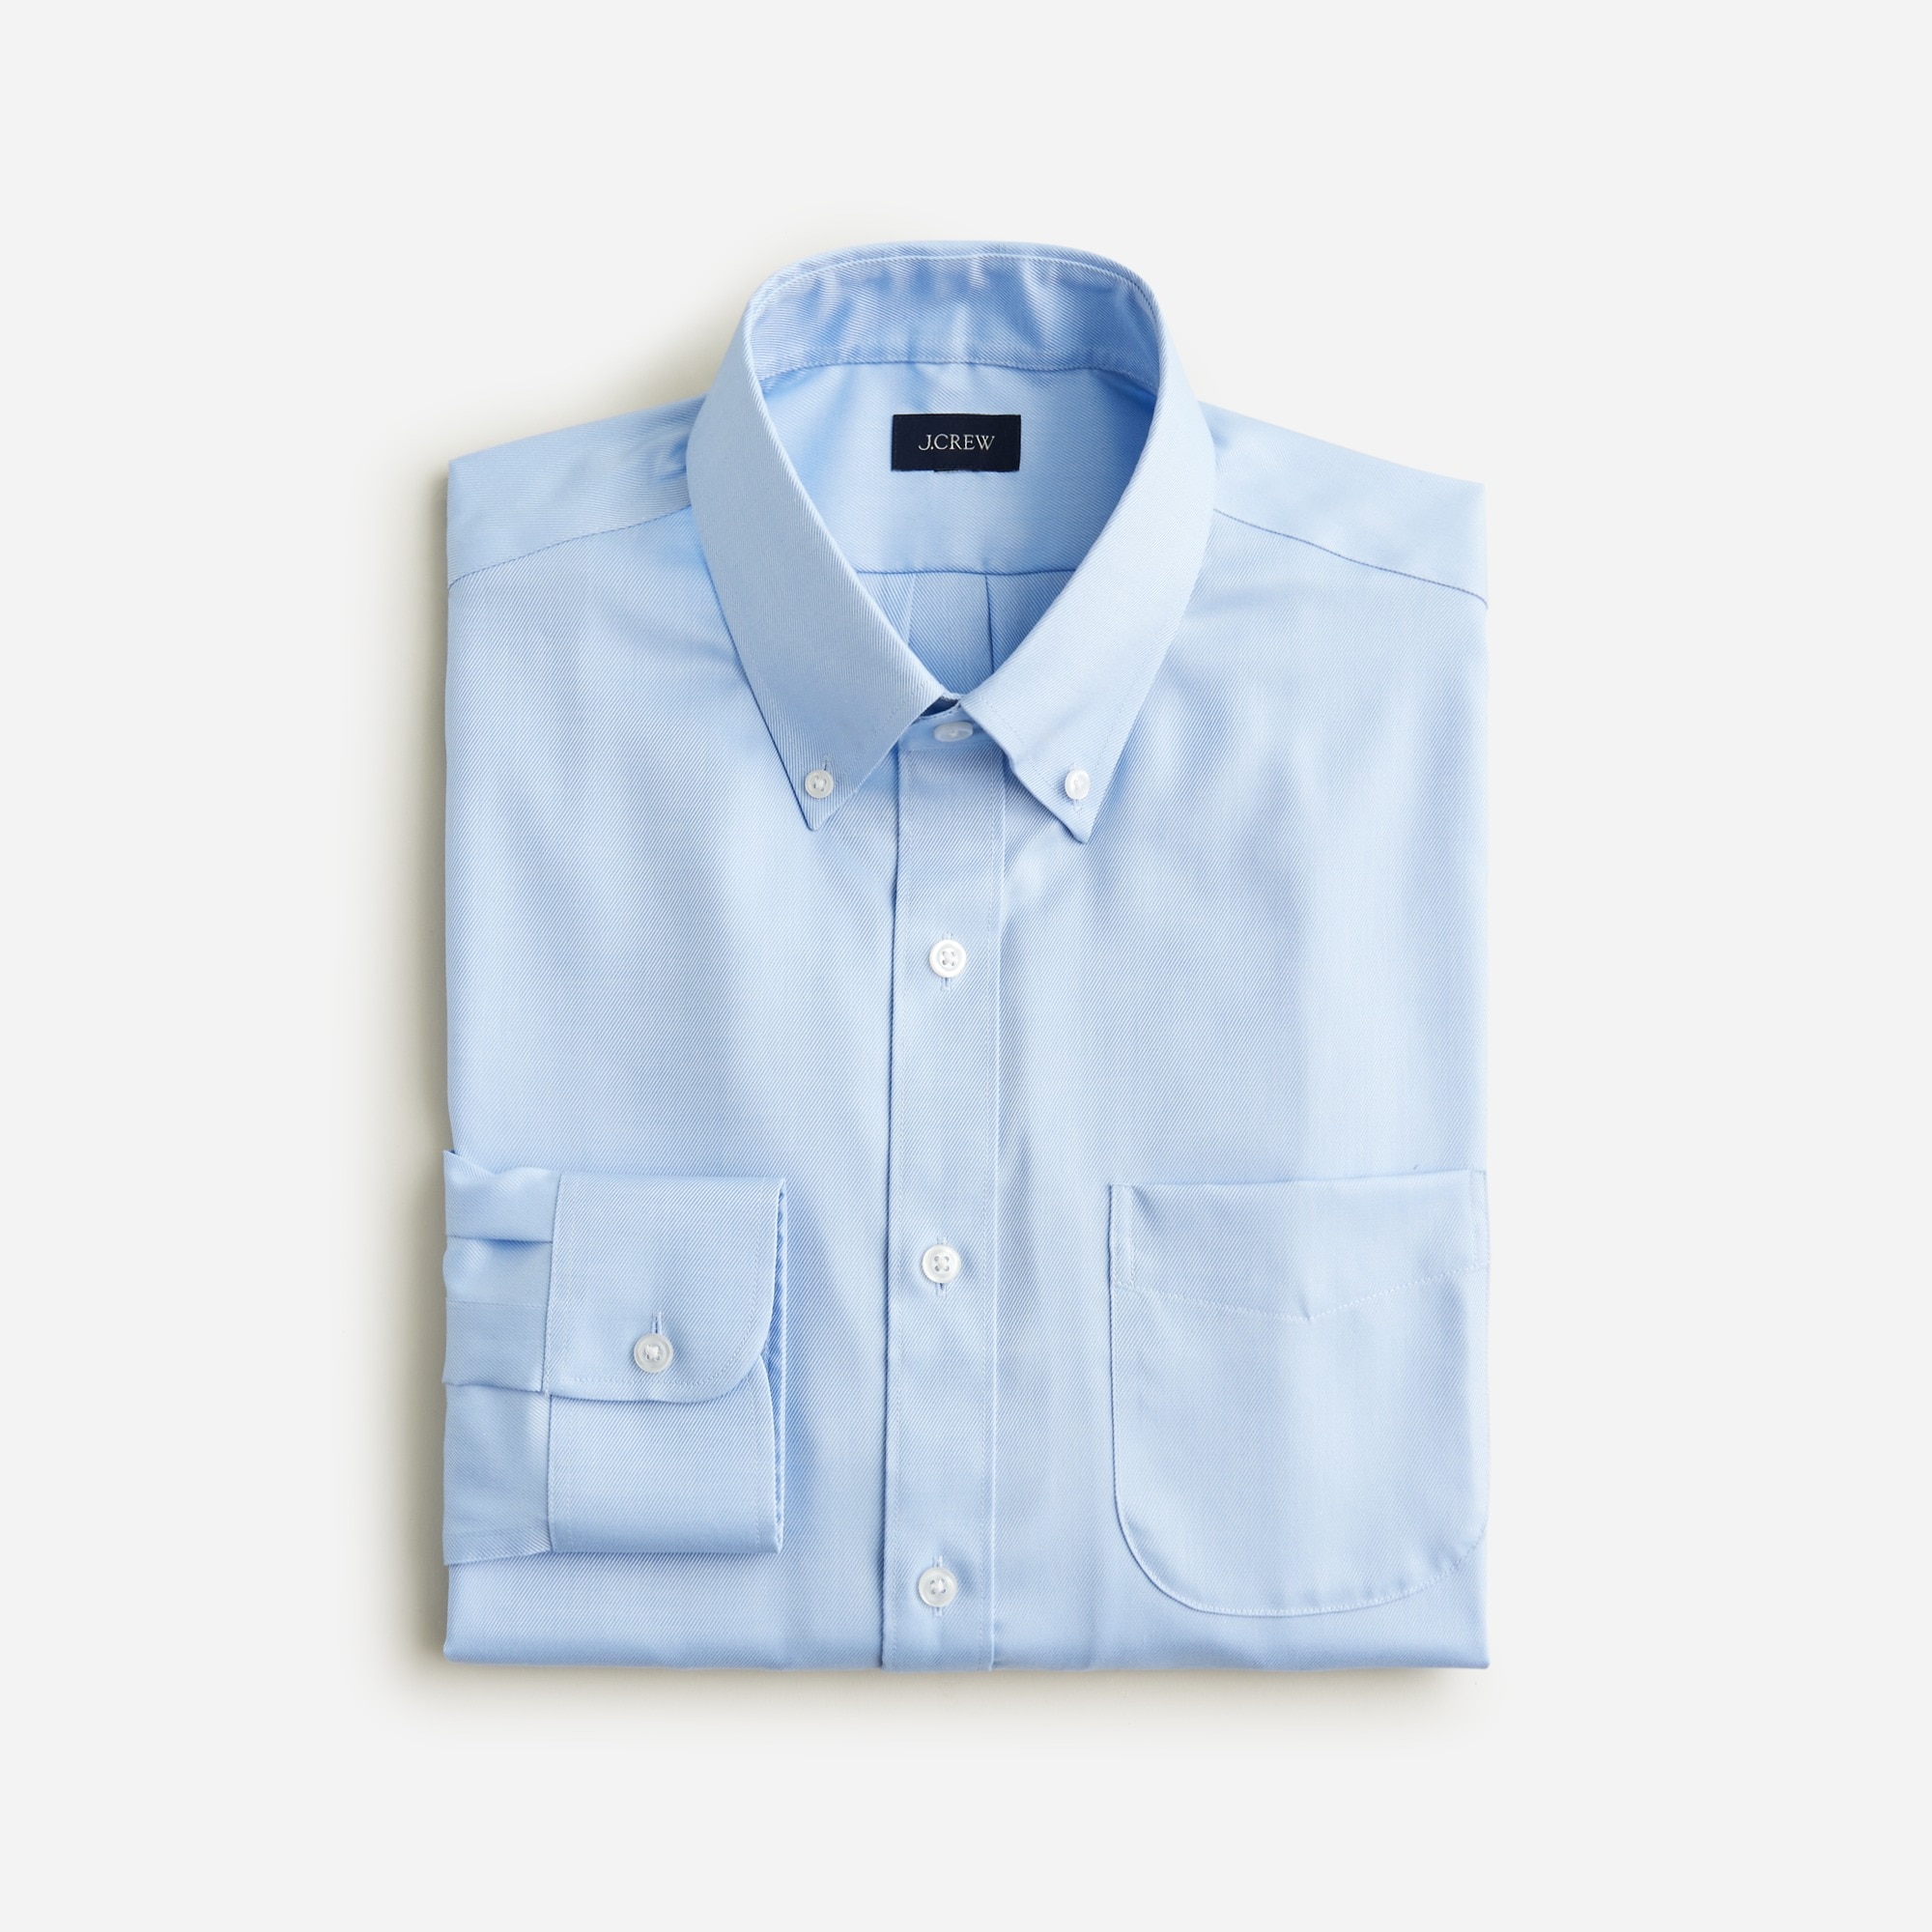  Tall Bowery wrinkle-free dress shirt with button-down collar